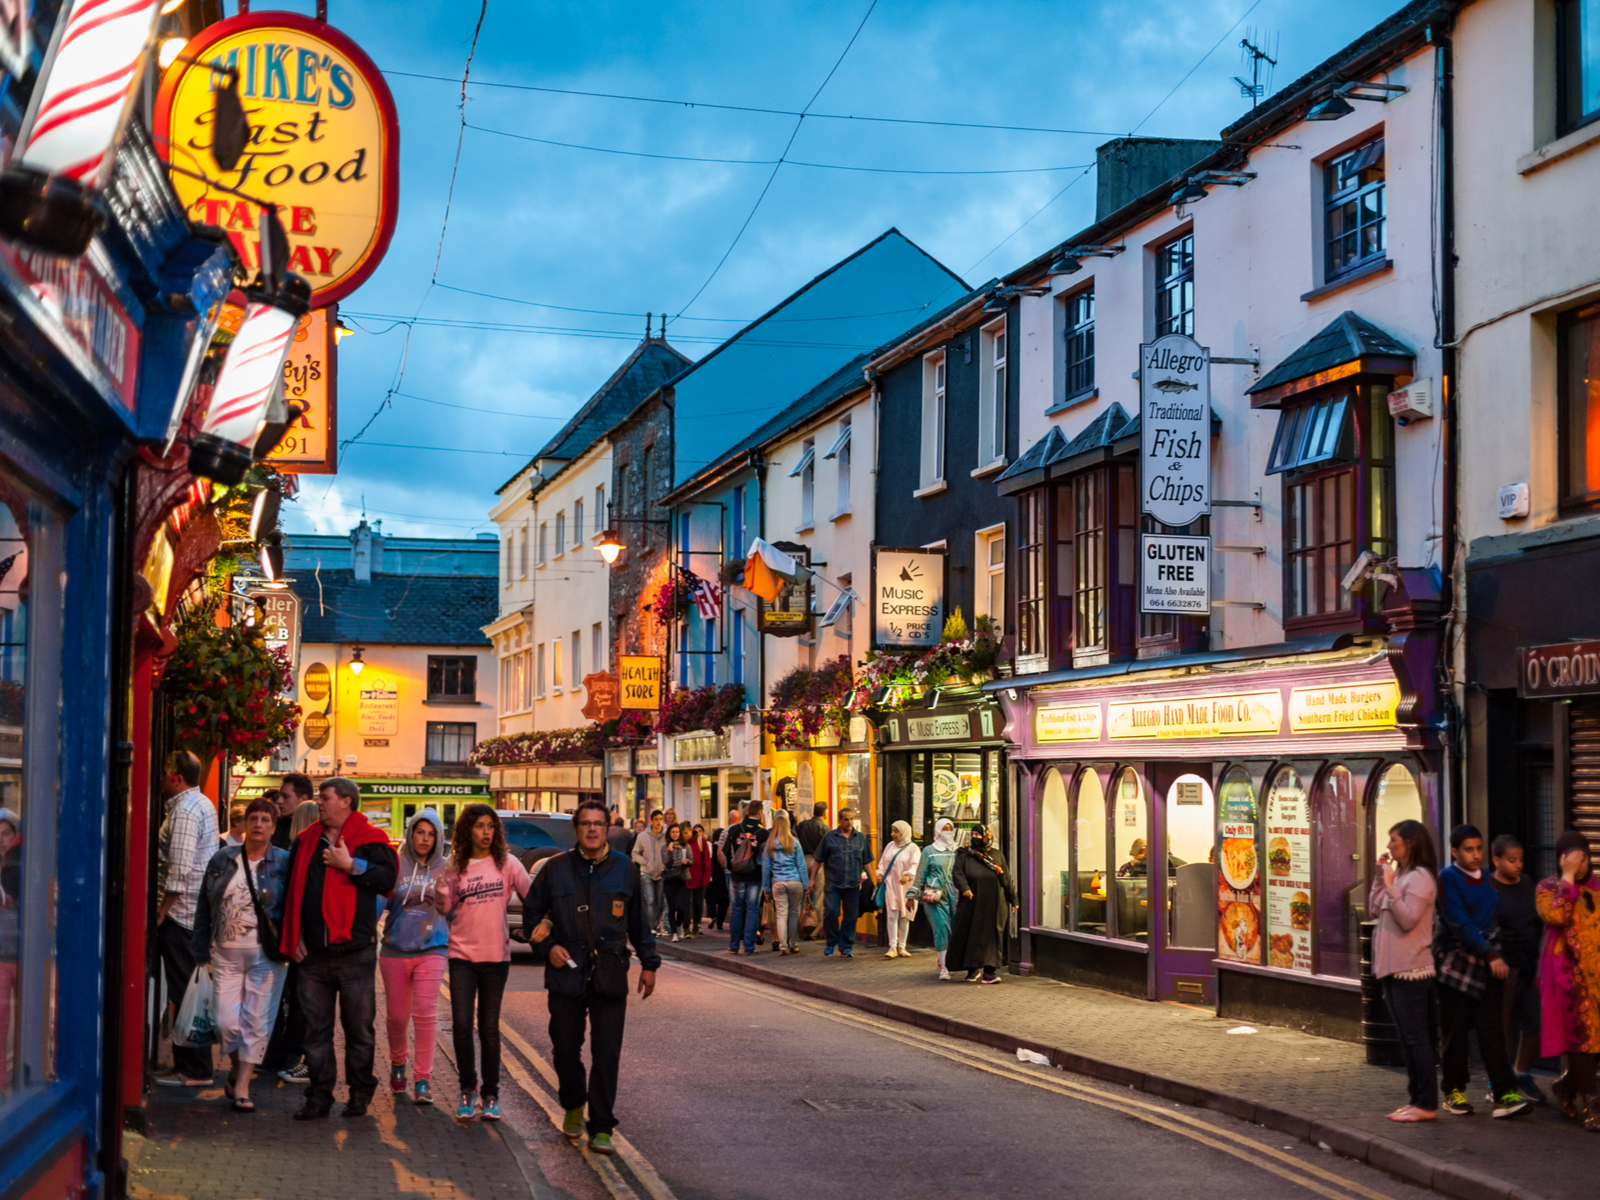 Busy dusk at Killarney town, one of the best places to visit in Ireland, where people are seen waking along sidewalks beside pubs and restaurants